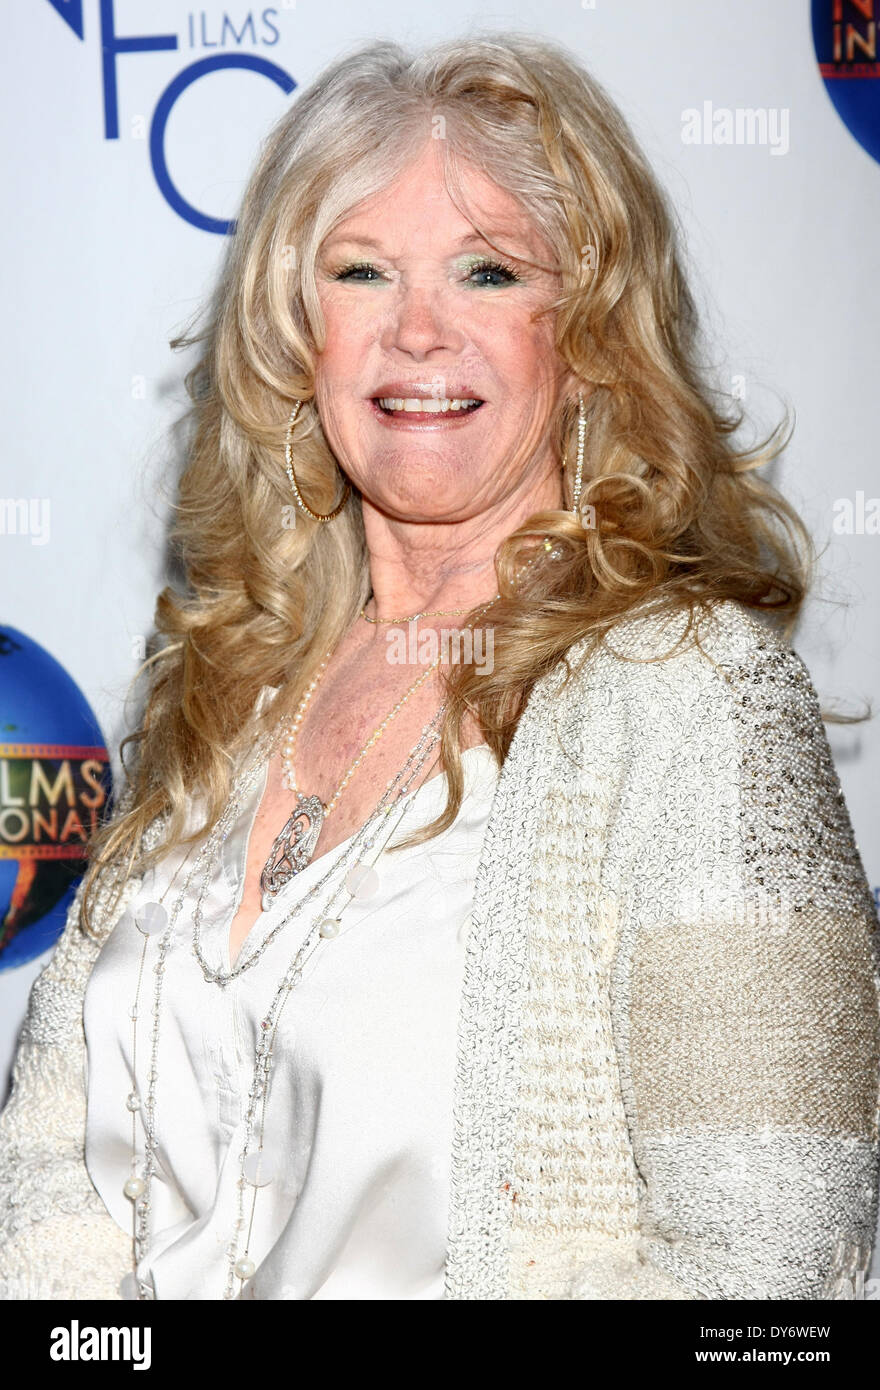 Saving Grace B. Jones - Los Angeles Special Screening held at ICM Screening RoomFeaturing: Connie Stevens Where: Century CIty California United StatesWhen: 13 Dec 2012 Stock Photo